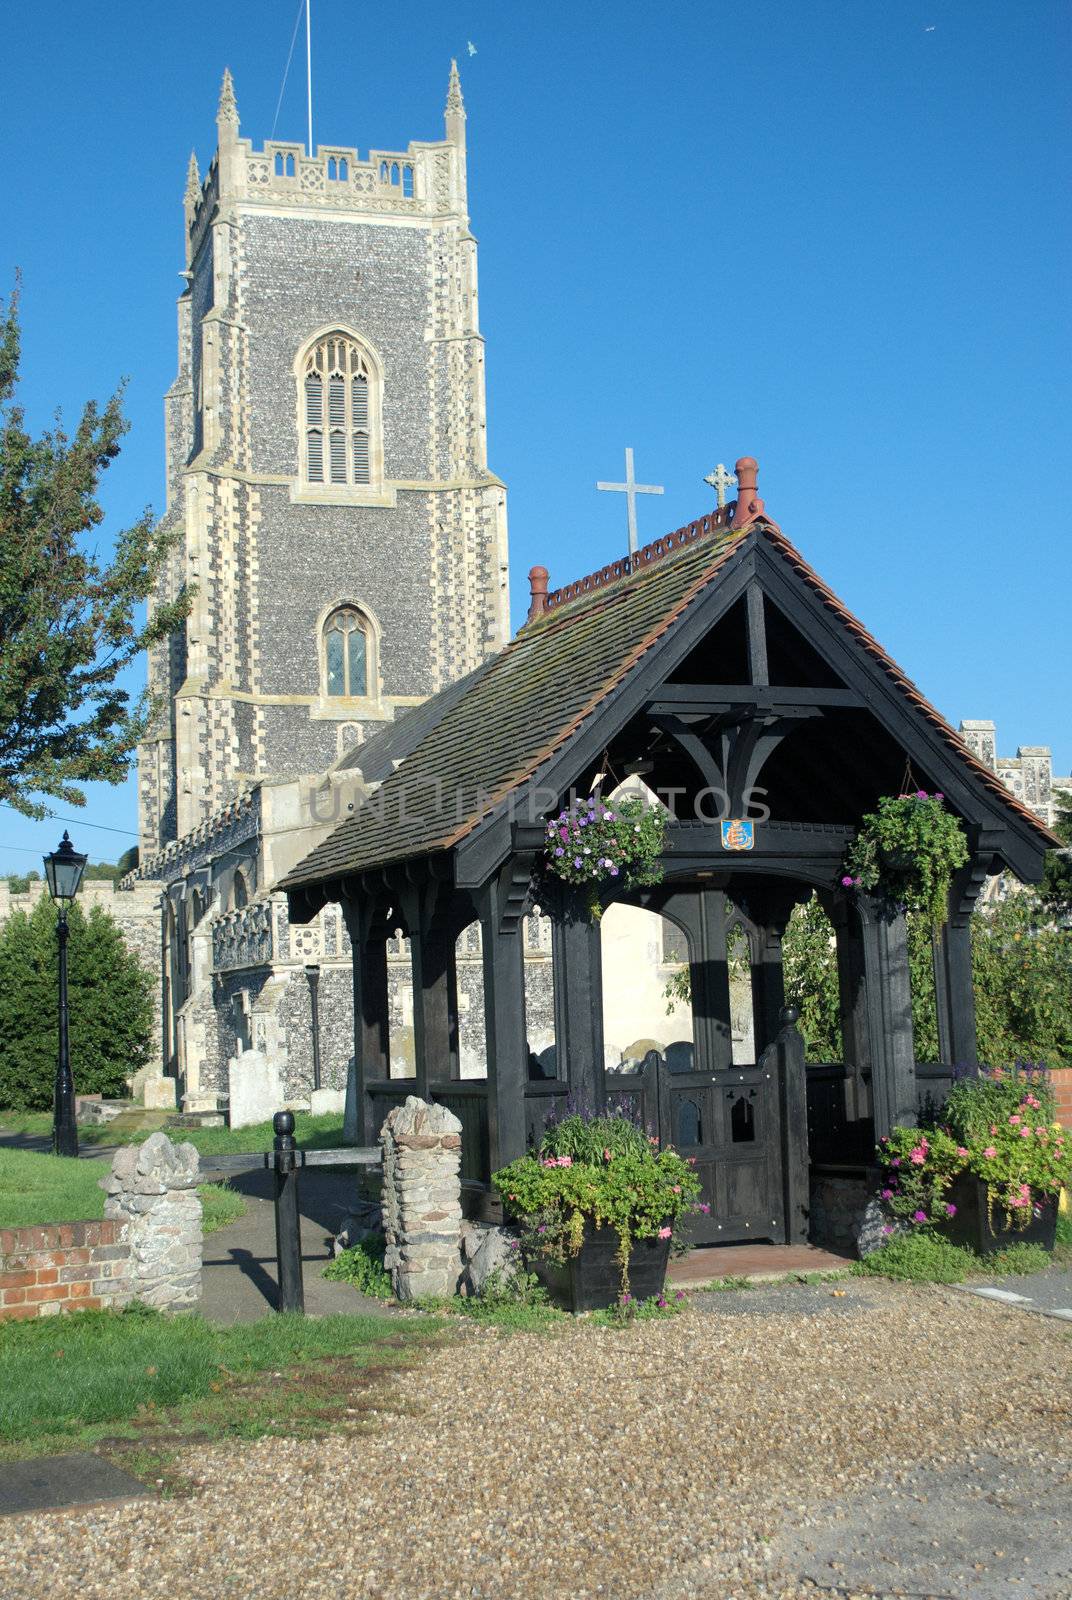 Typical English parish church with lych gate in foreground